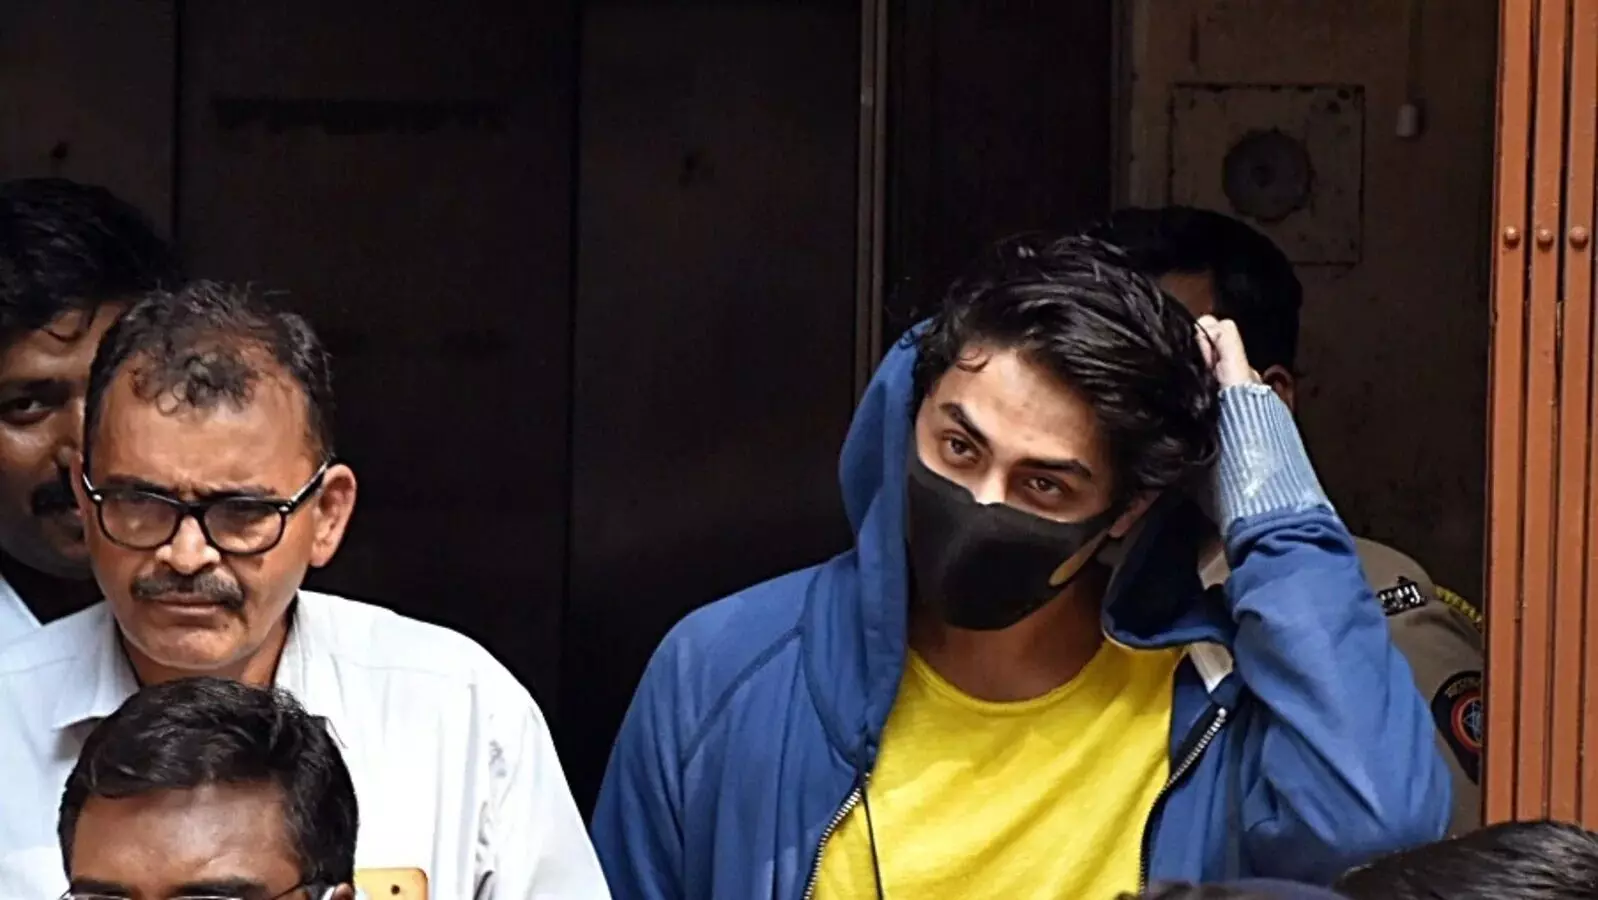 Aryan Khan case: Witness alleges Rs 25 crore bribe demand, NCB denies claims